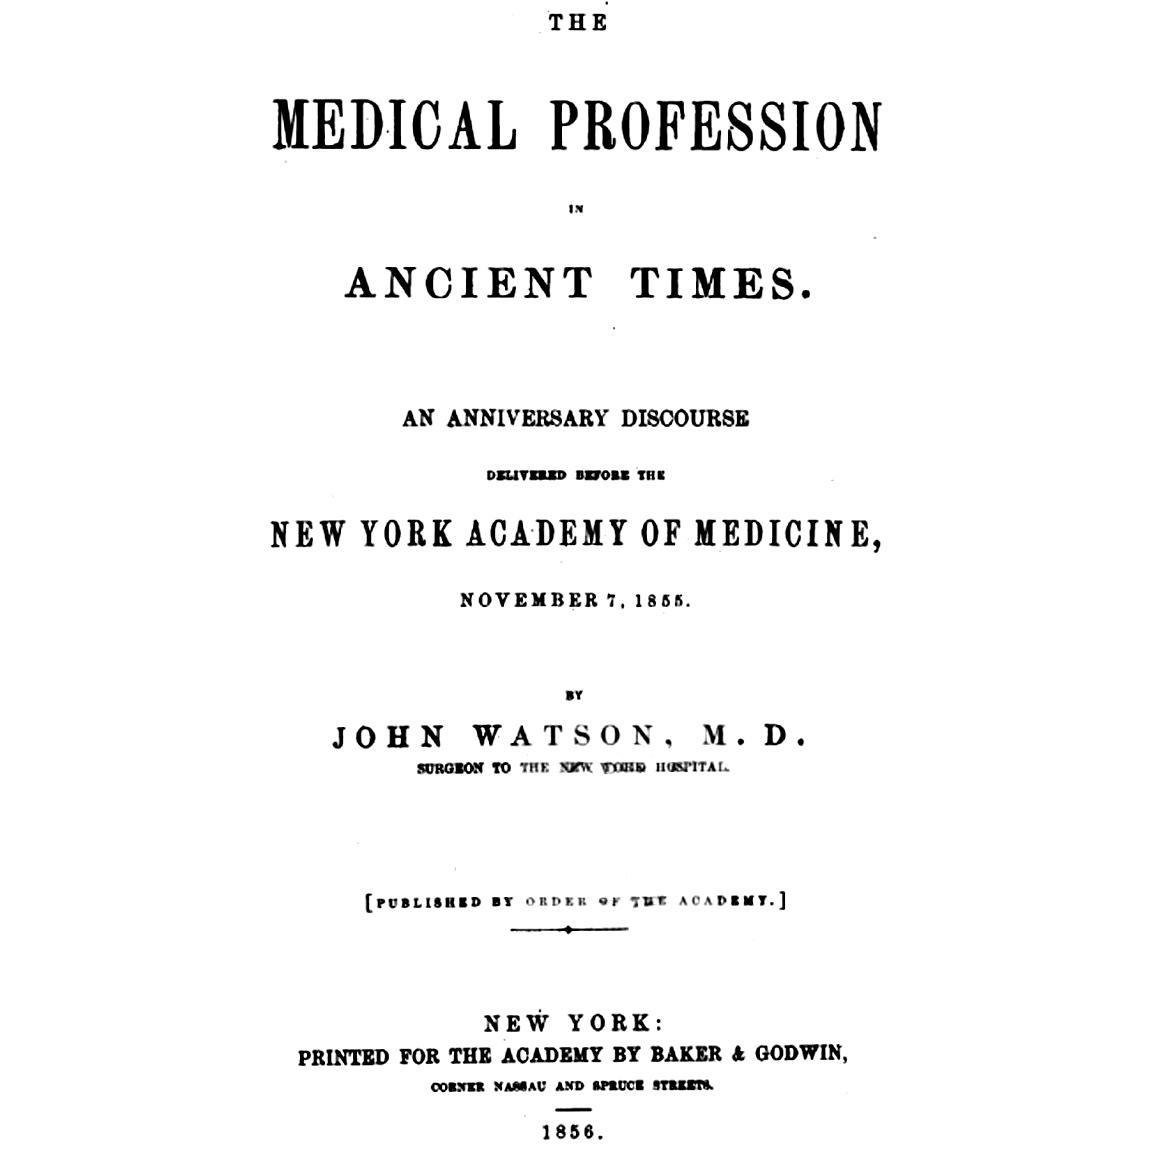 1856-WATSON-Med-Profession-Ancient-Times-title